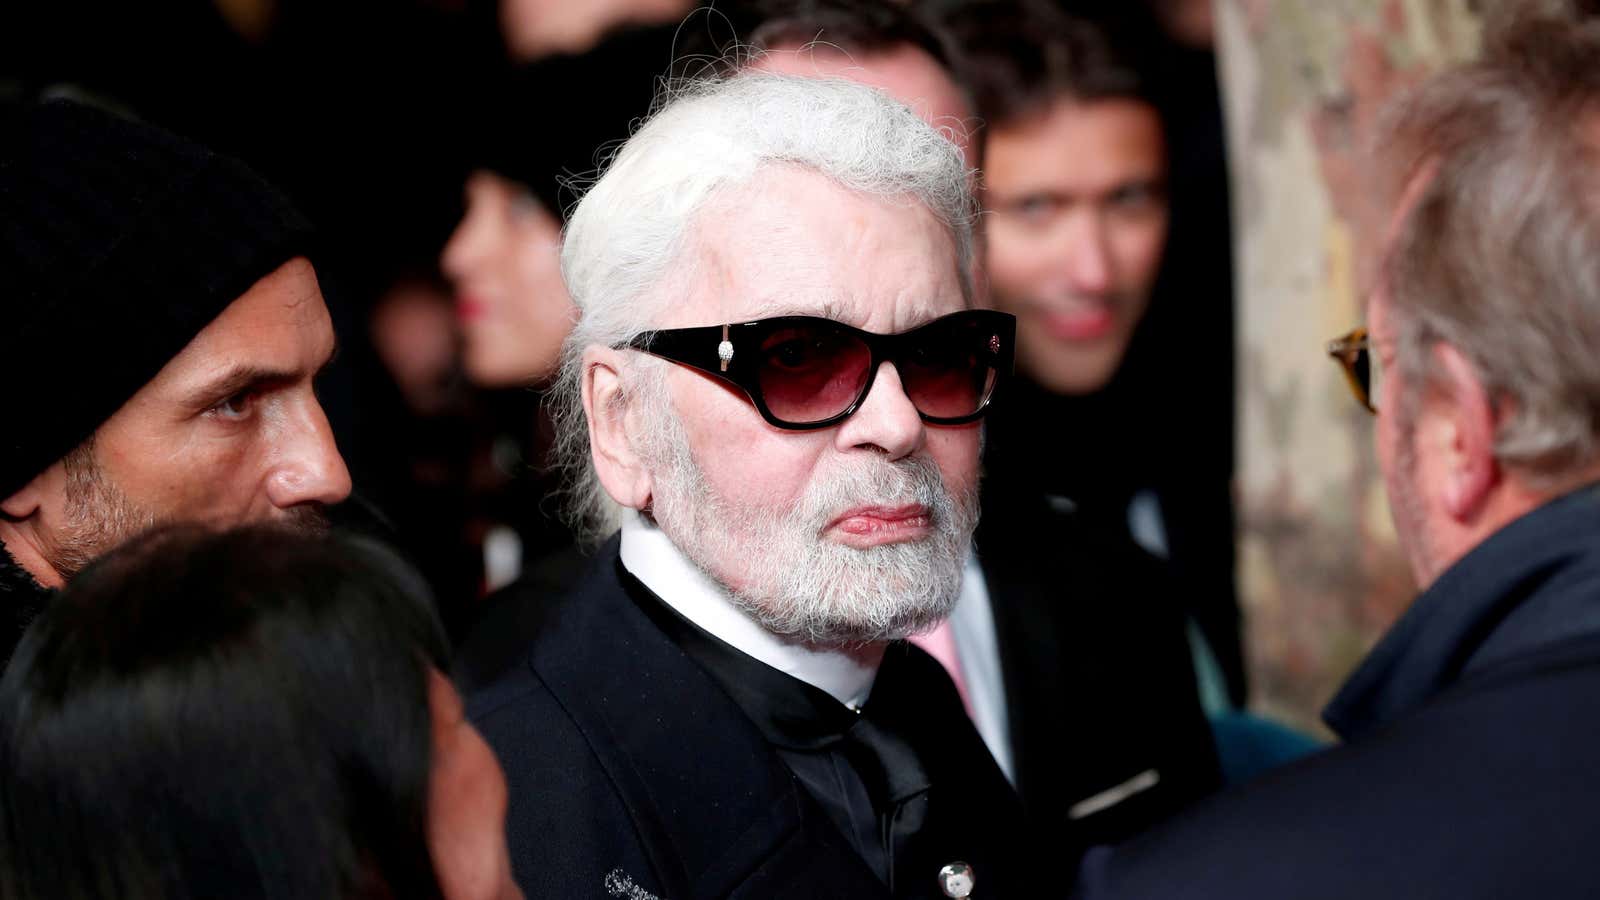 Chanel's long-time artistic director Karl Lagerfeld has died